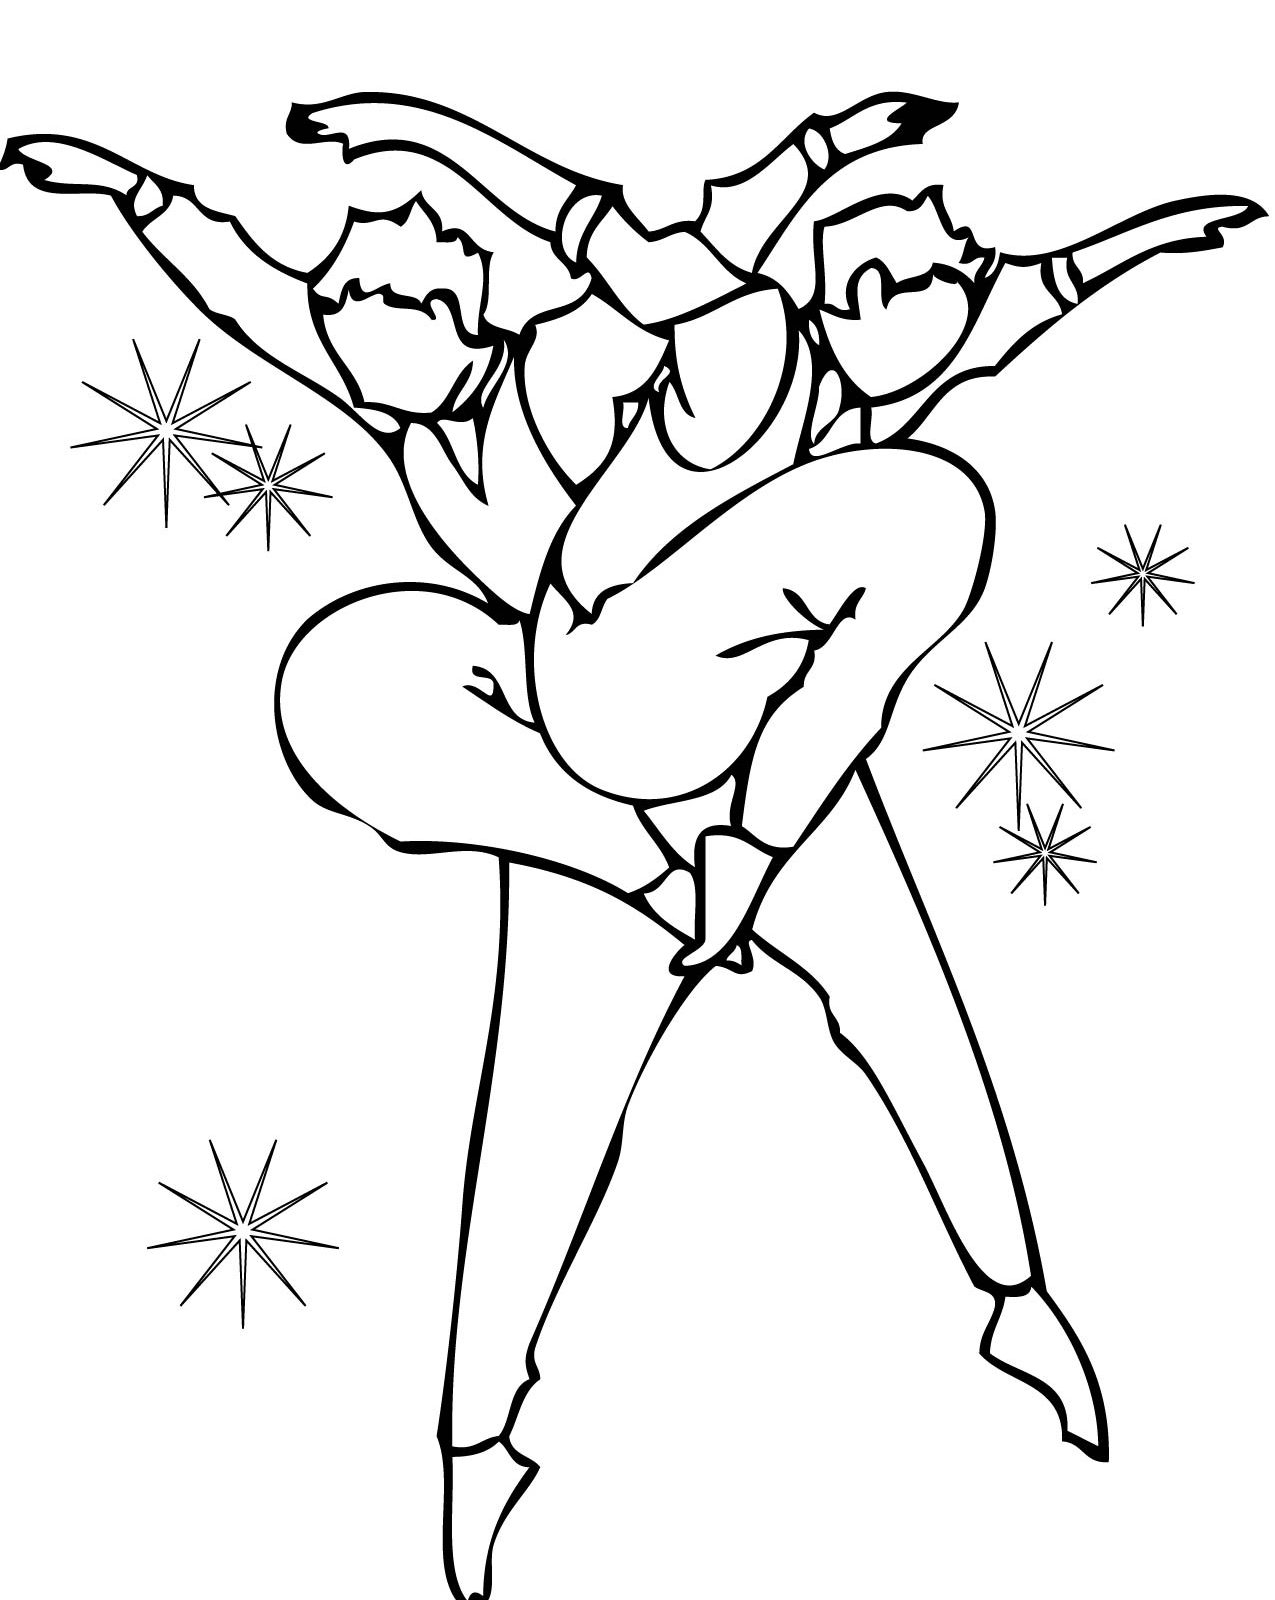 Dancing Coloring Page Dance Coloring Pages Best Coloring Pages For Kids